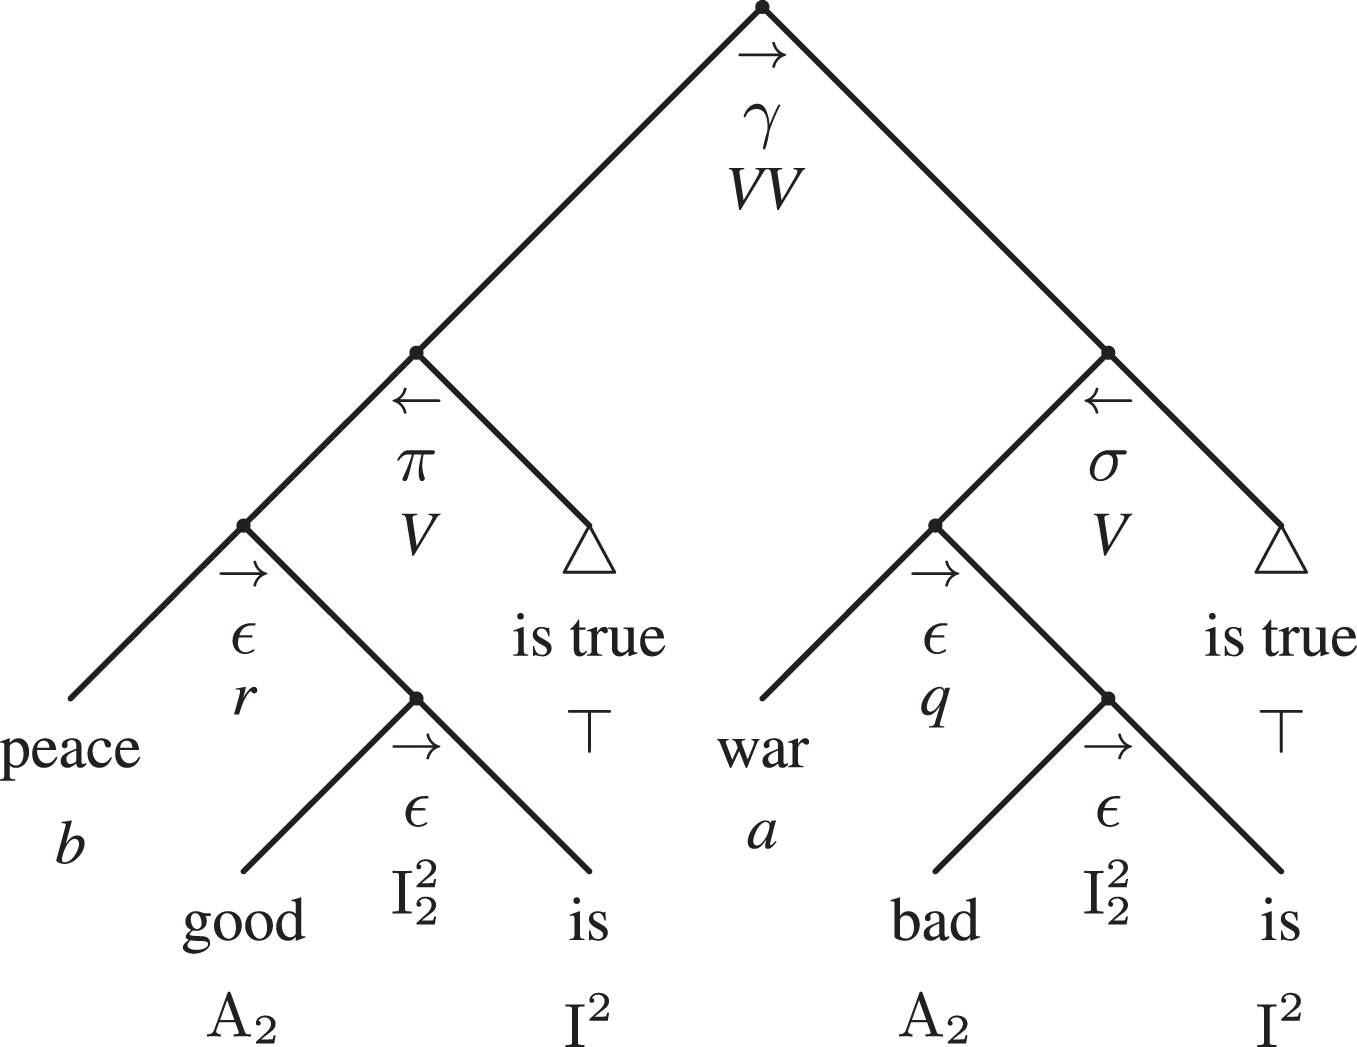 The compact argumentative adtree of example 3